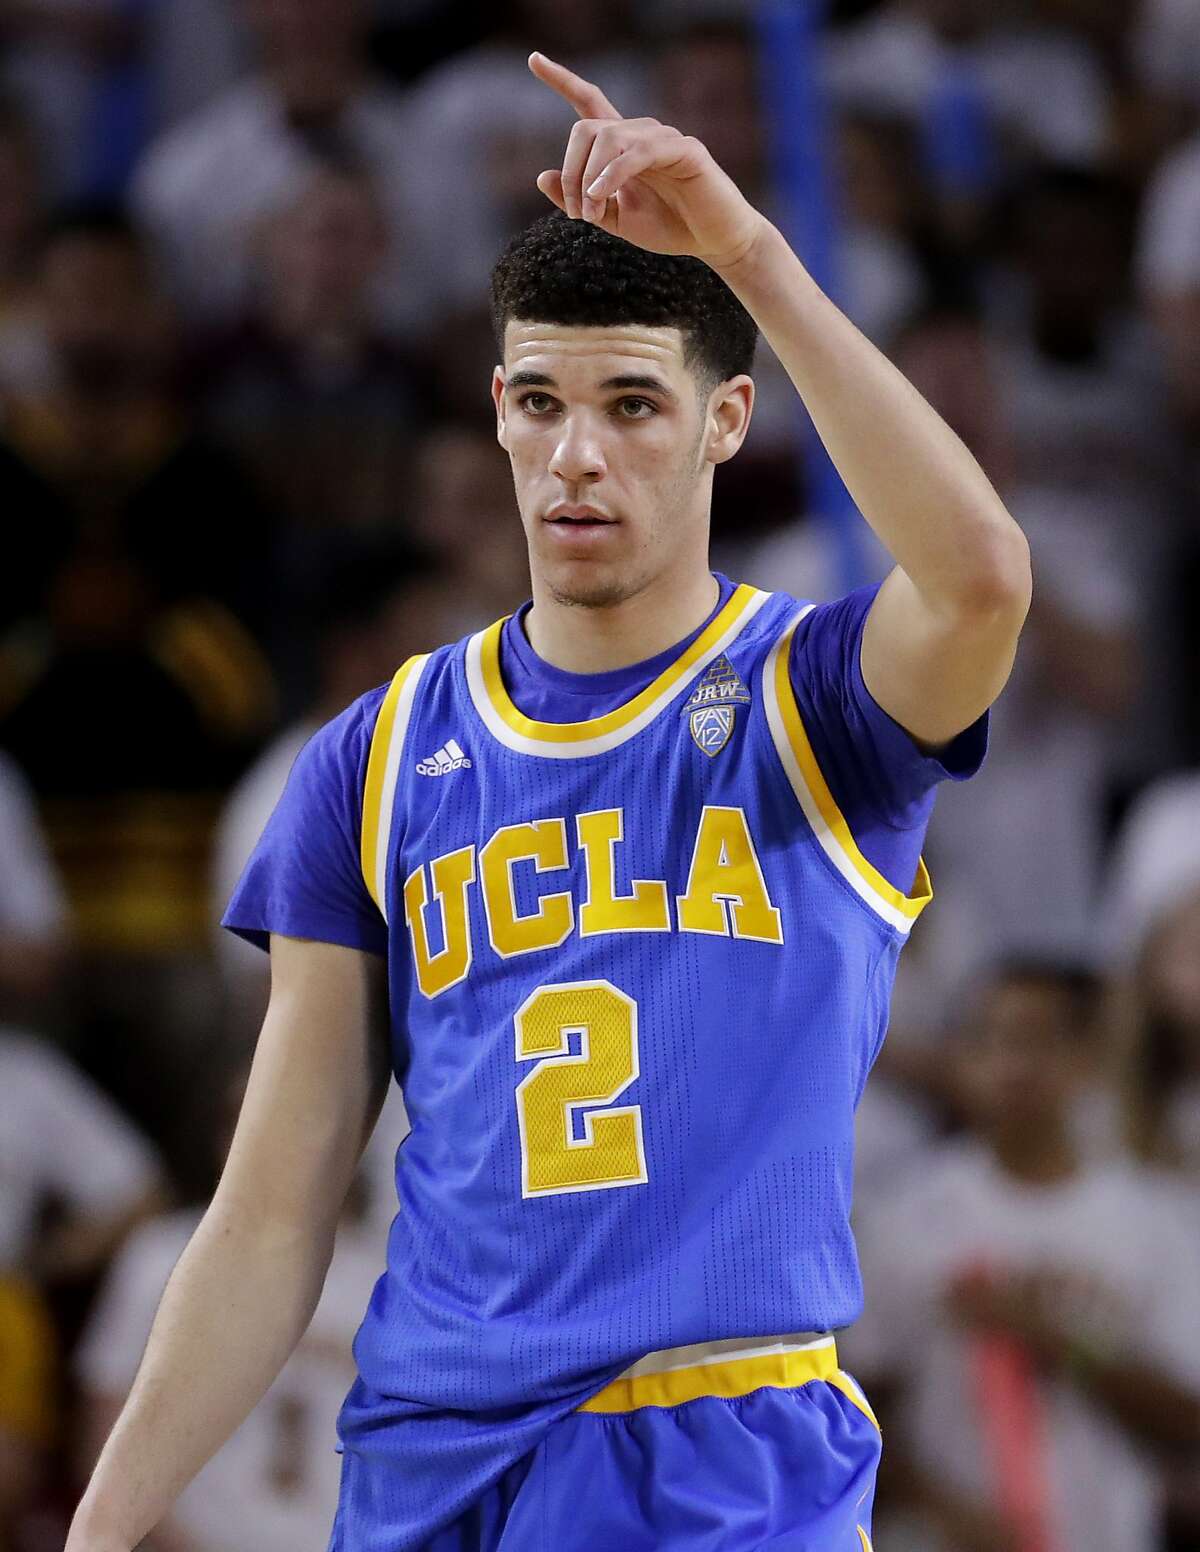 2. Lakers Lonzo Ball, UCLA Position/Height: PG/ 6-6 As much as the Lakers moved D’Angelo Russell for cap reasons (tying Timofey Mozgov’s contract to him), the deal opened the point for Ball.